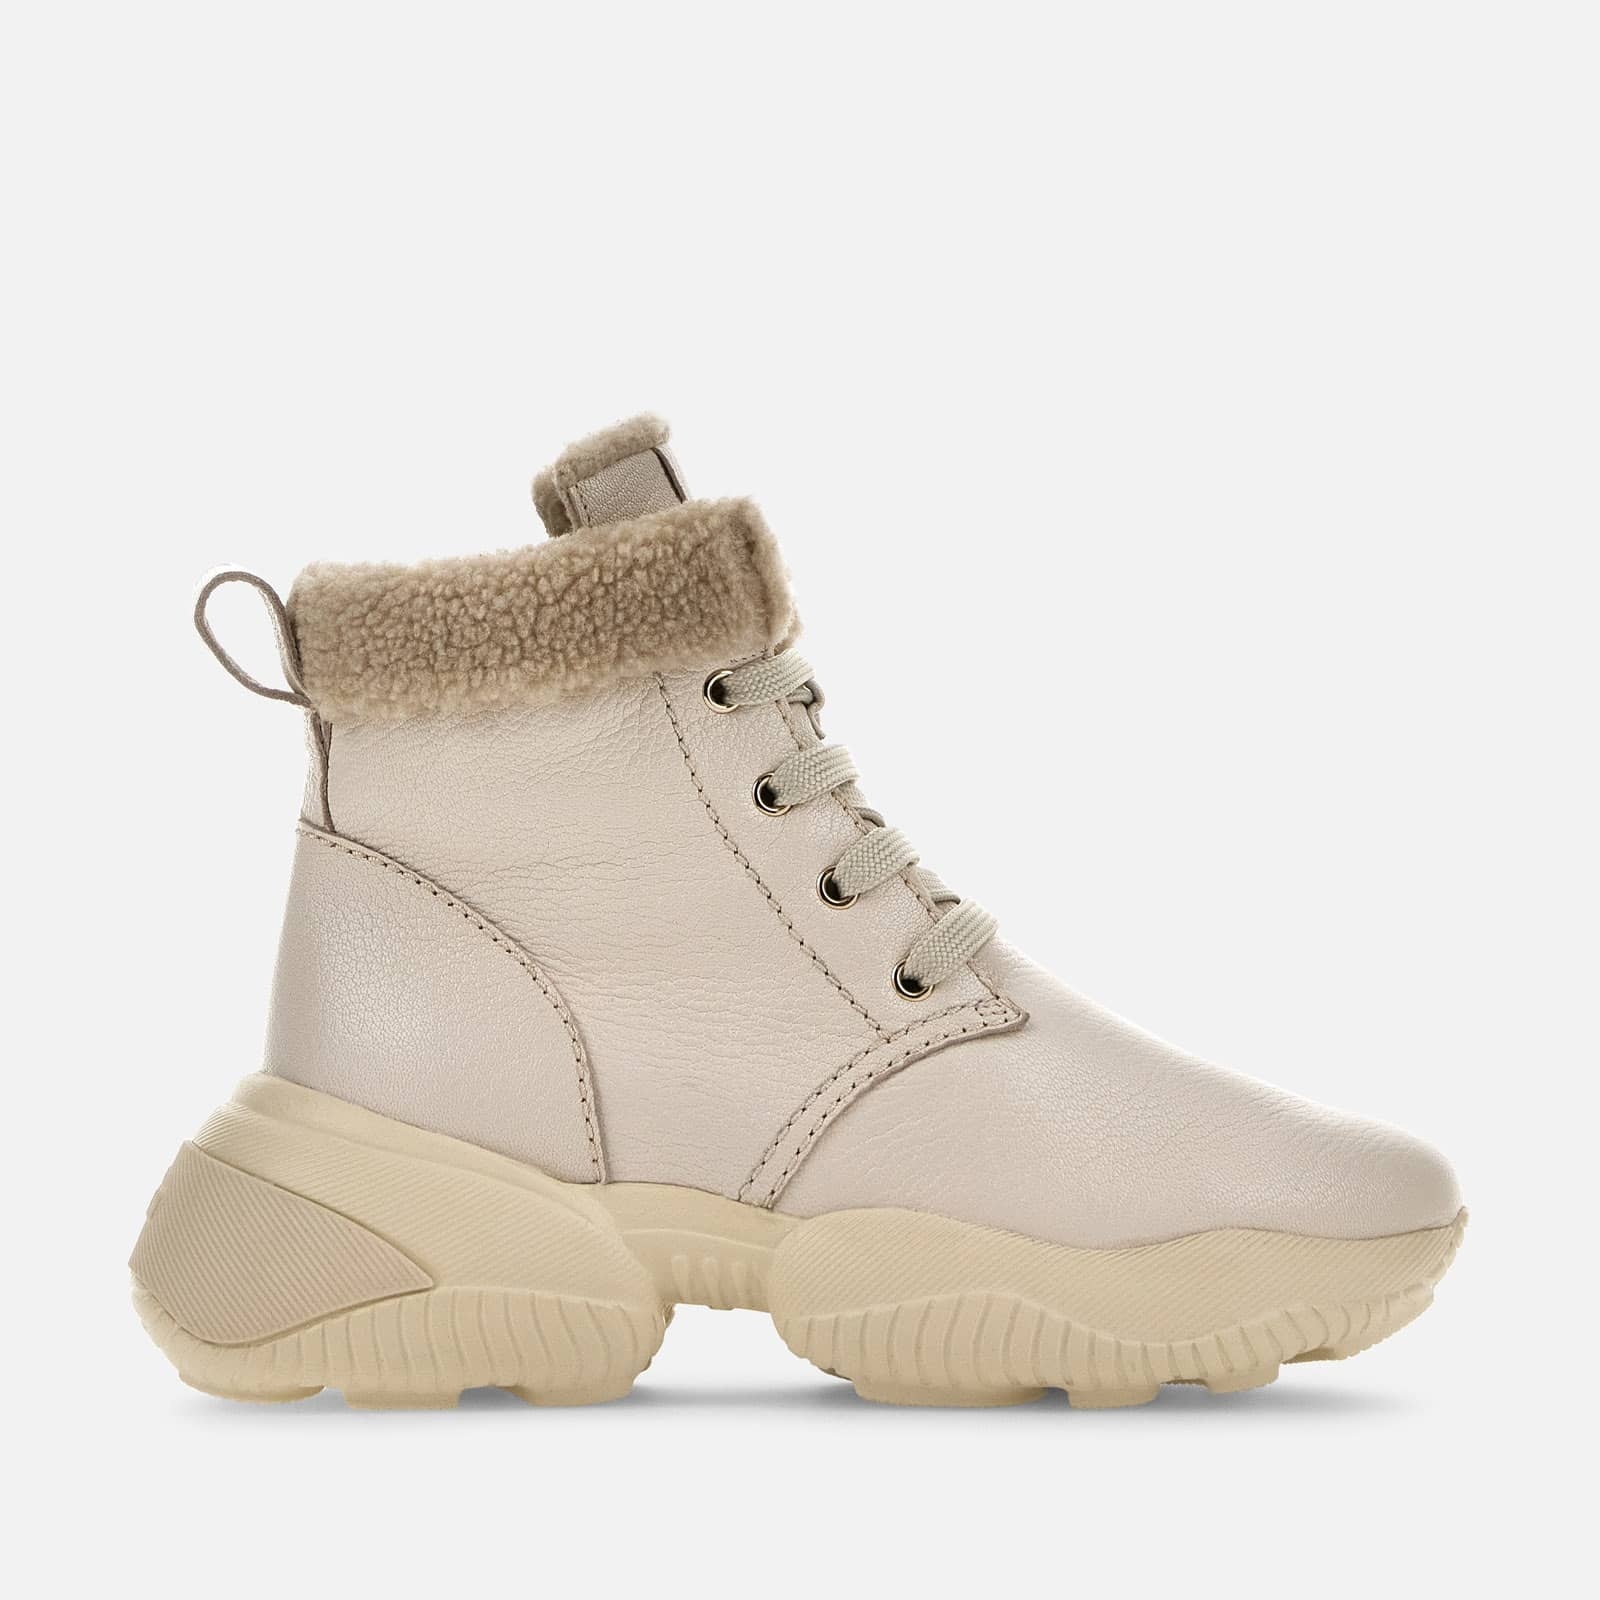 Hogan Interaction - Ankle Boots Beige - 1